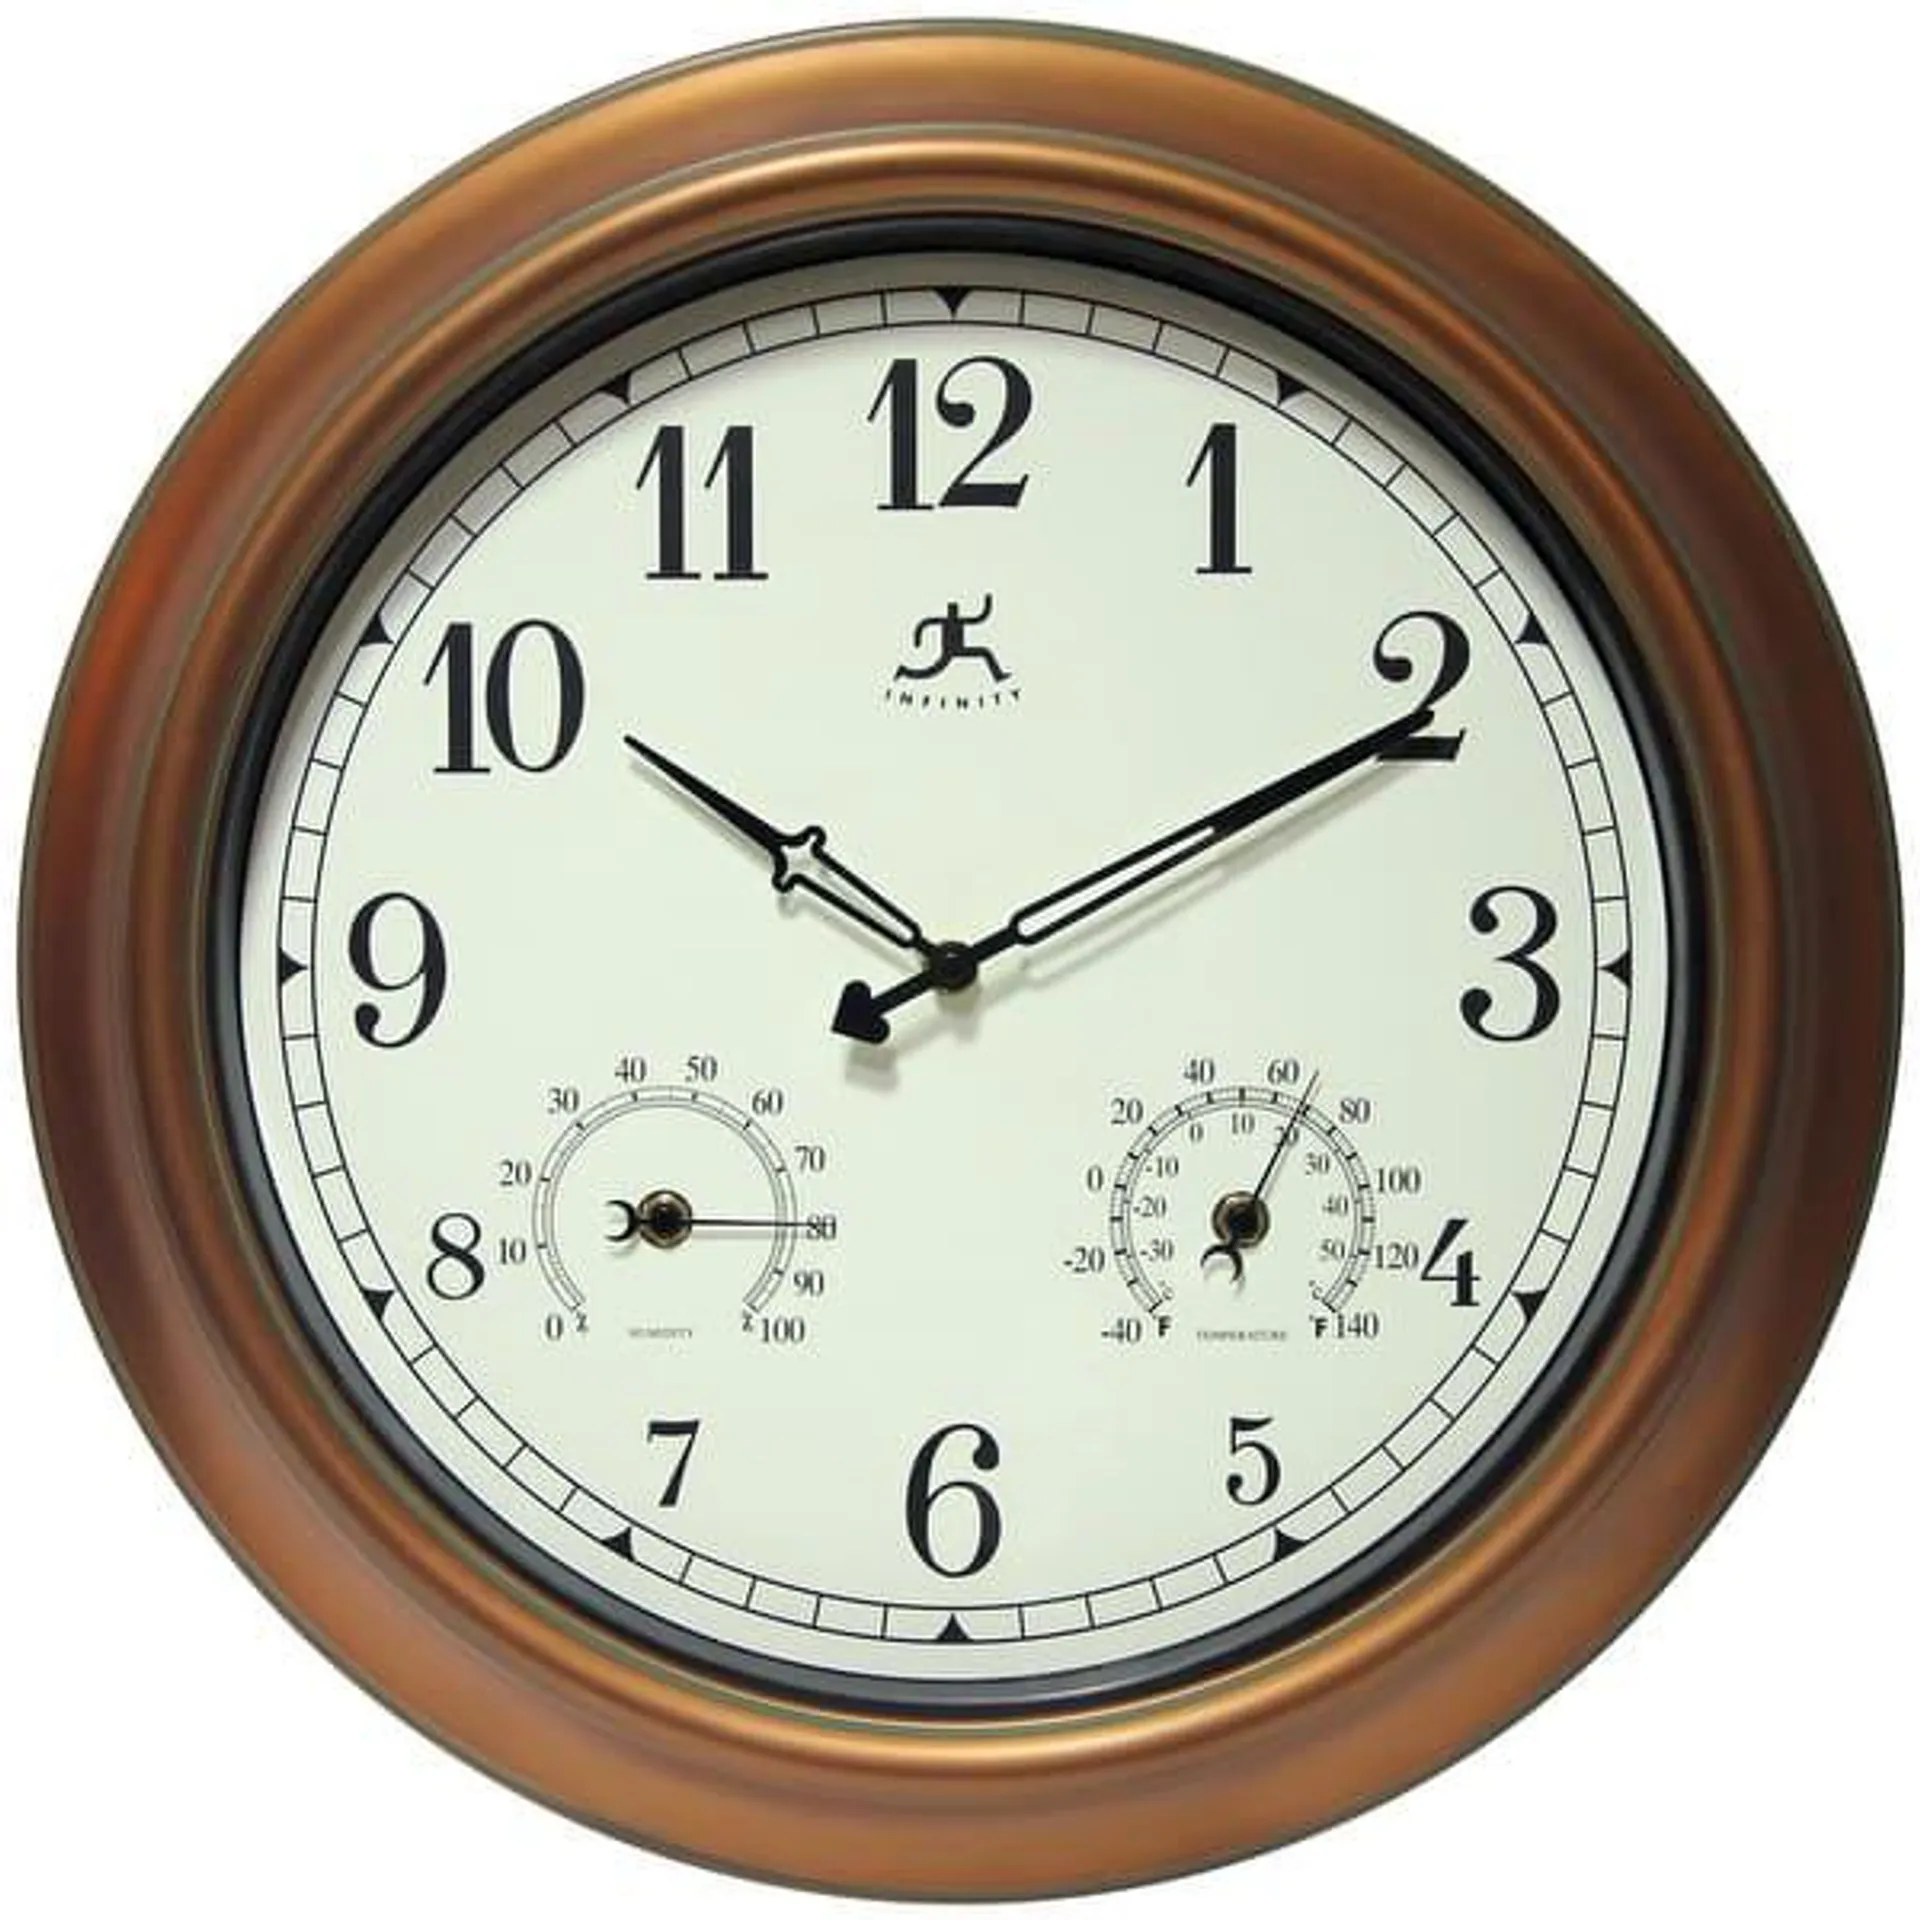 The Craftsman Indoor/Outdoor Wall Clock Thermometer 18 inch by Infinity Instruments - 18 x 2.25 x 18